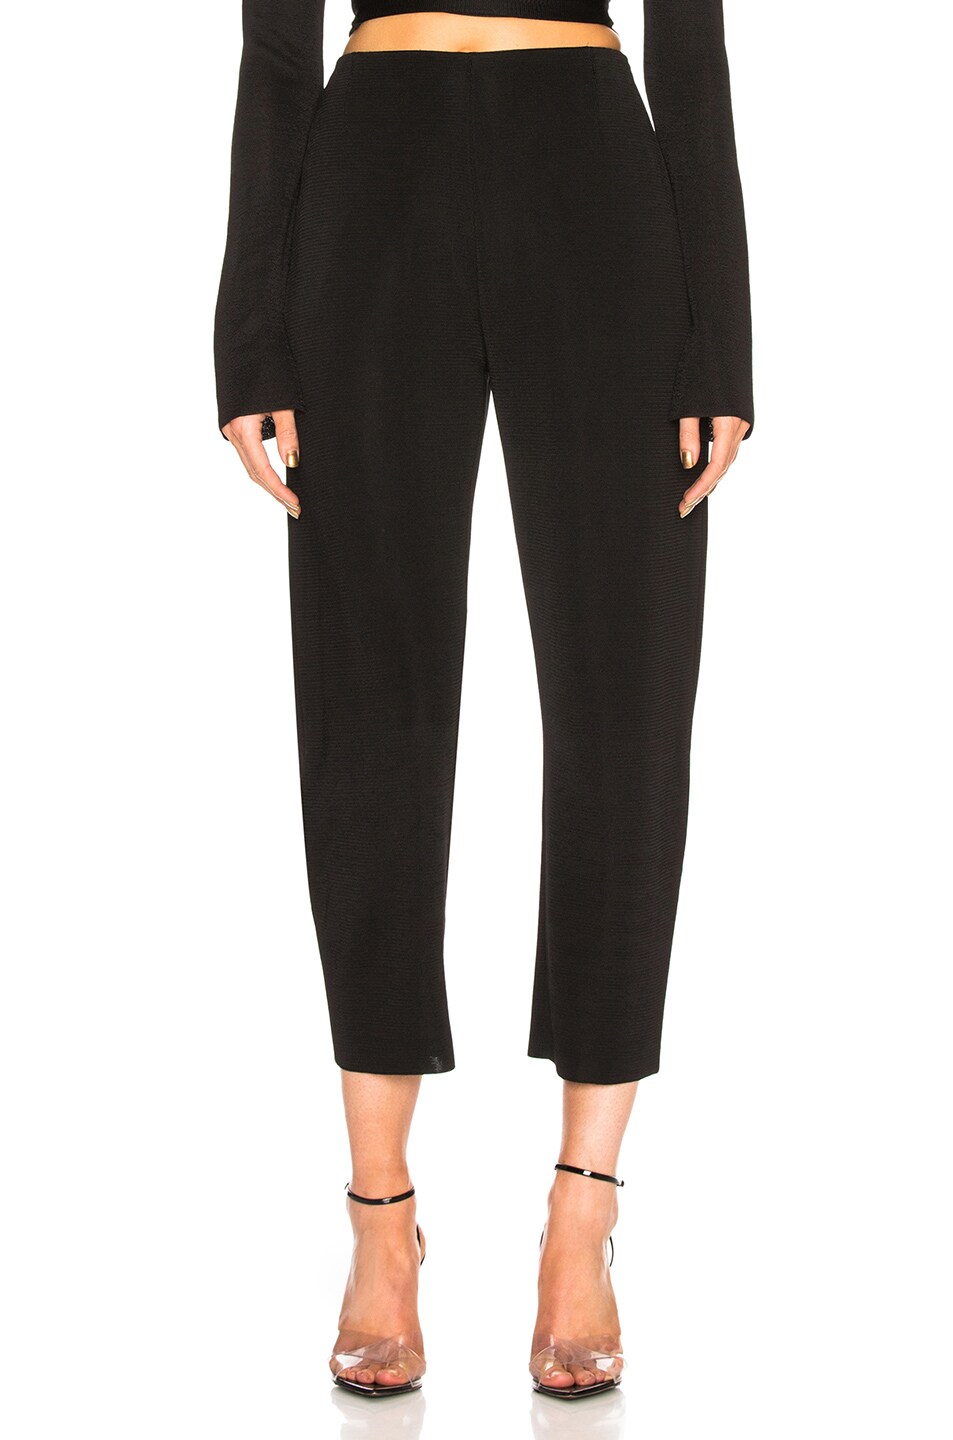 Image 1 of TRE by Natalie Ratabesi Madison Pant in Black